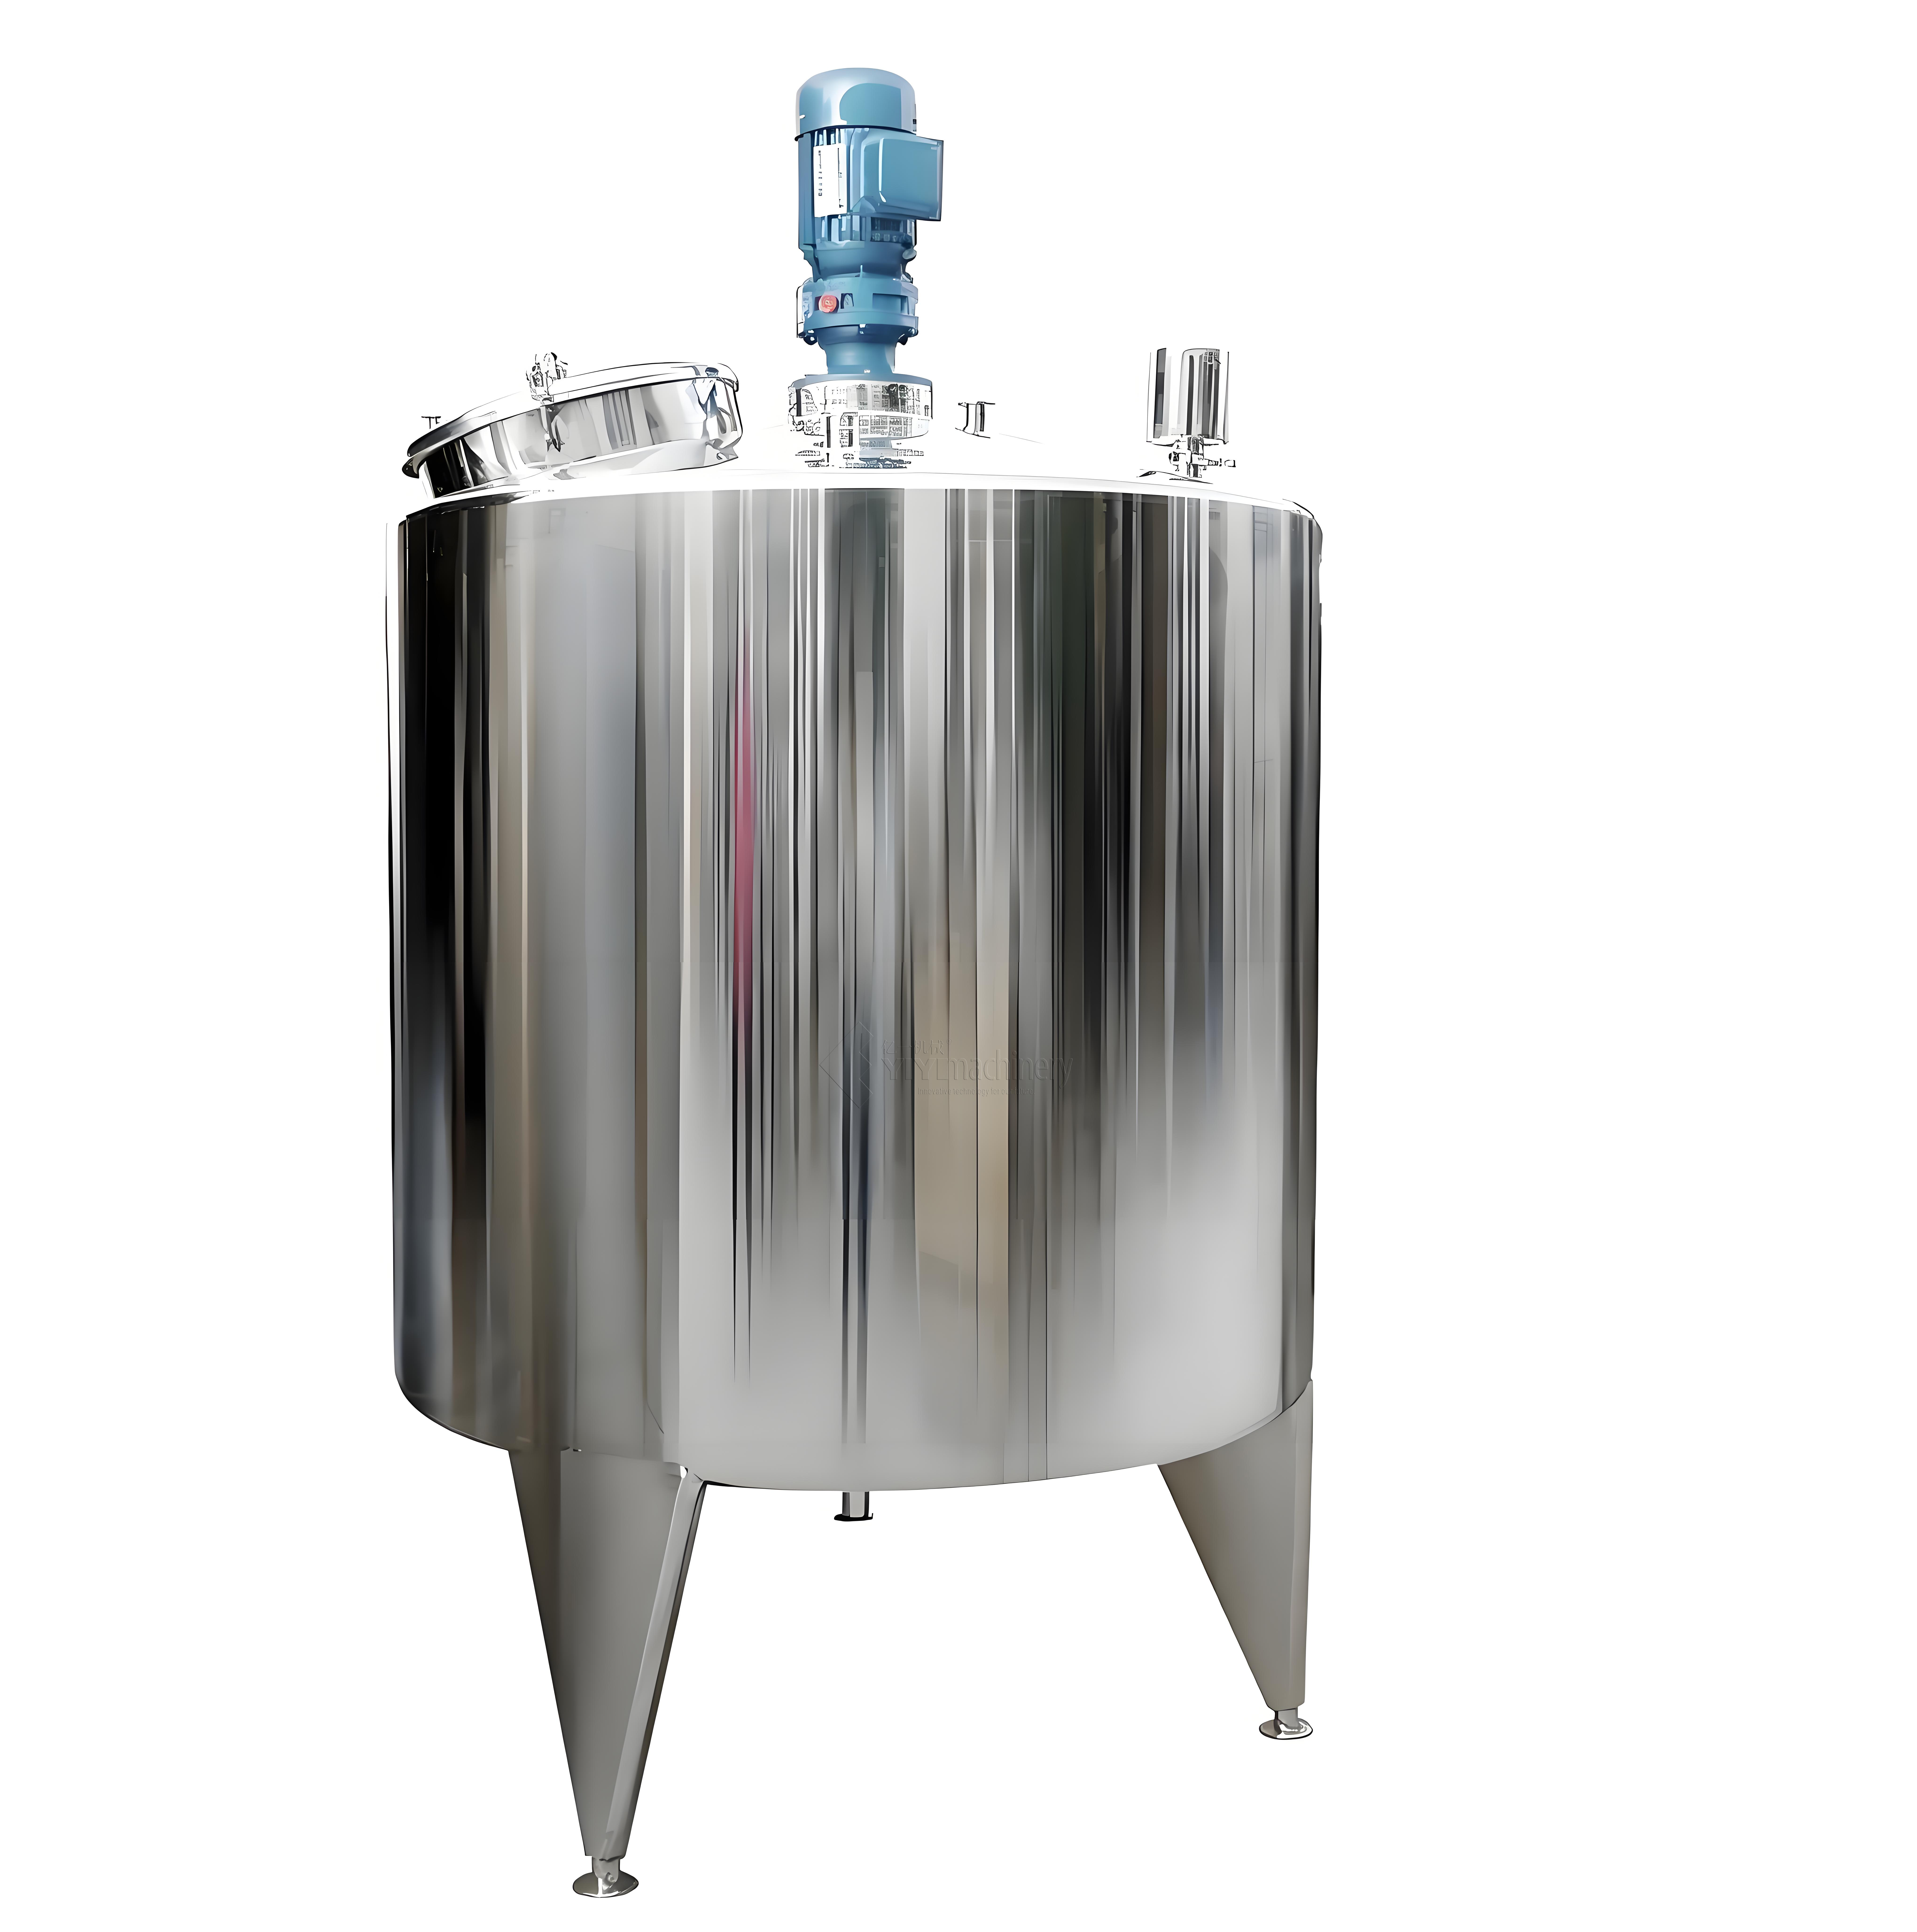  Liquid Syrup Mixing Tank with Agitator Double Jacketed Heating Stainless Steel Tanks South Africa 